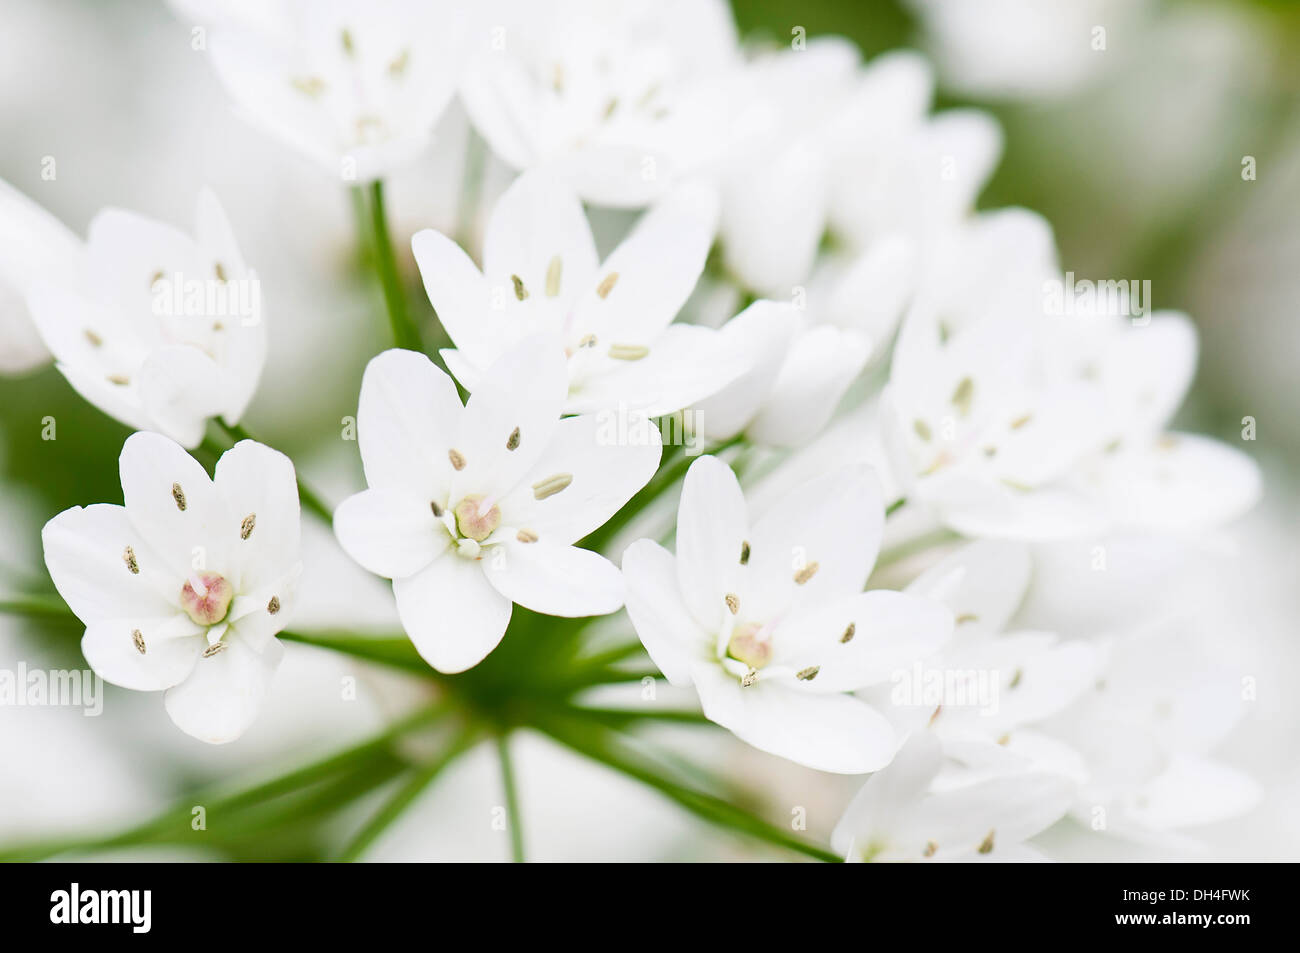 Star-of-Bethlehem, Ornithogalum thyrsoides. Close view of clustered, white, star-shaped flowers. Stock Photo